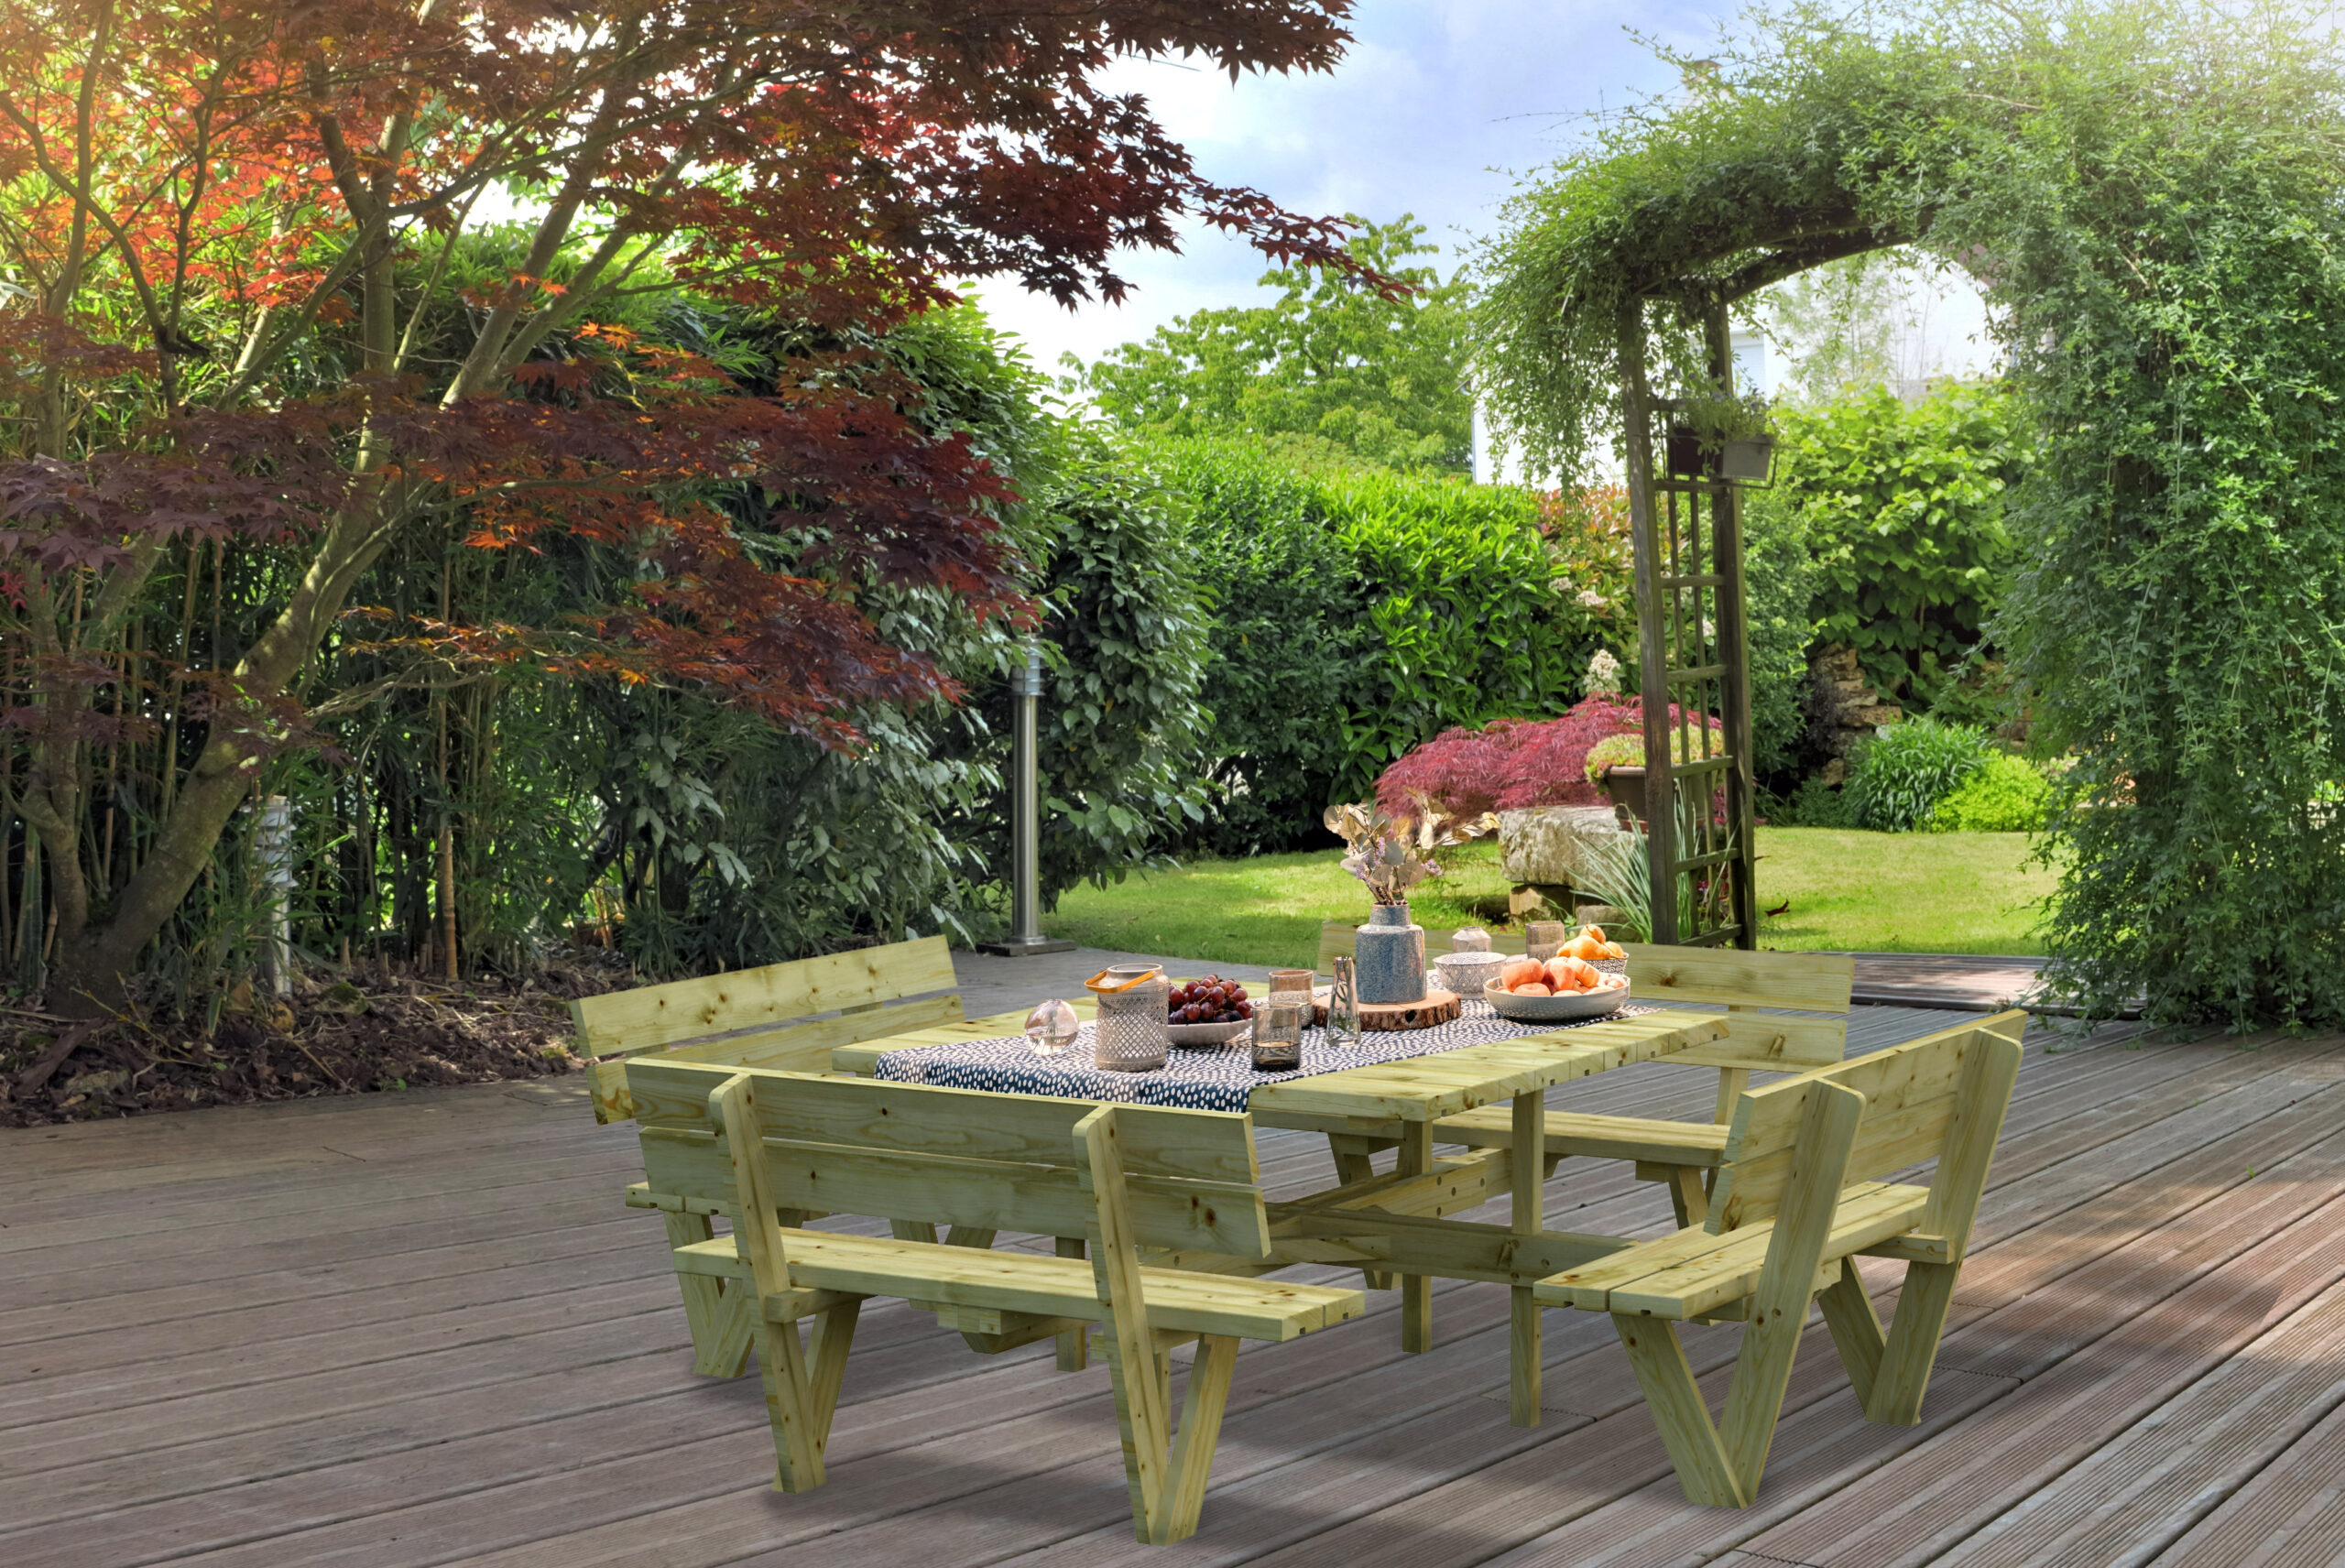 wooden terrace in a garden with japanese maple foliage